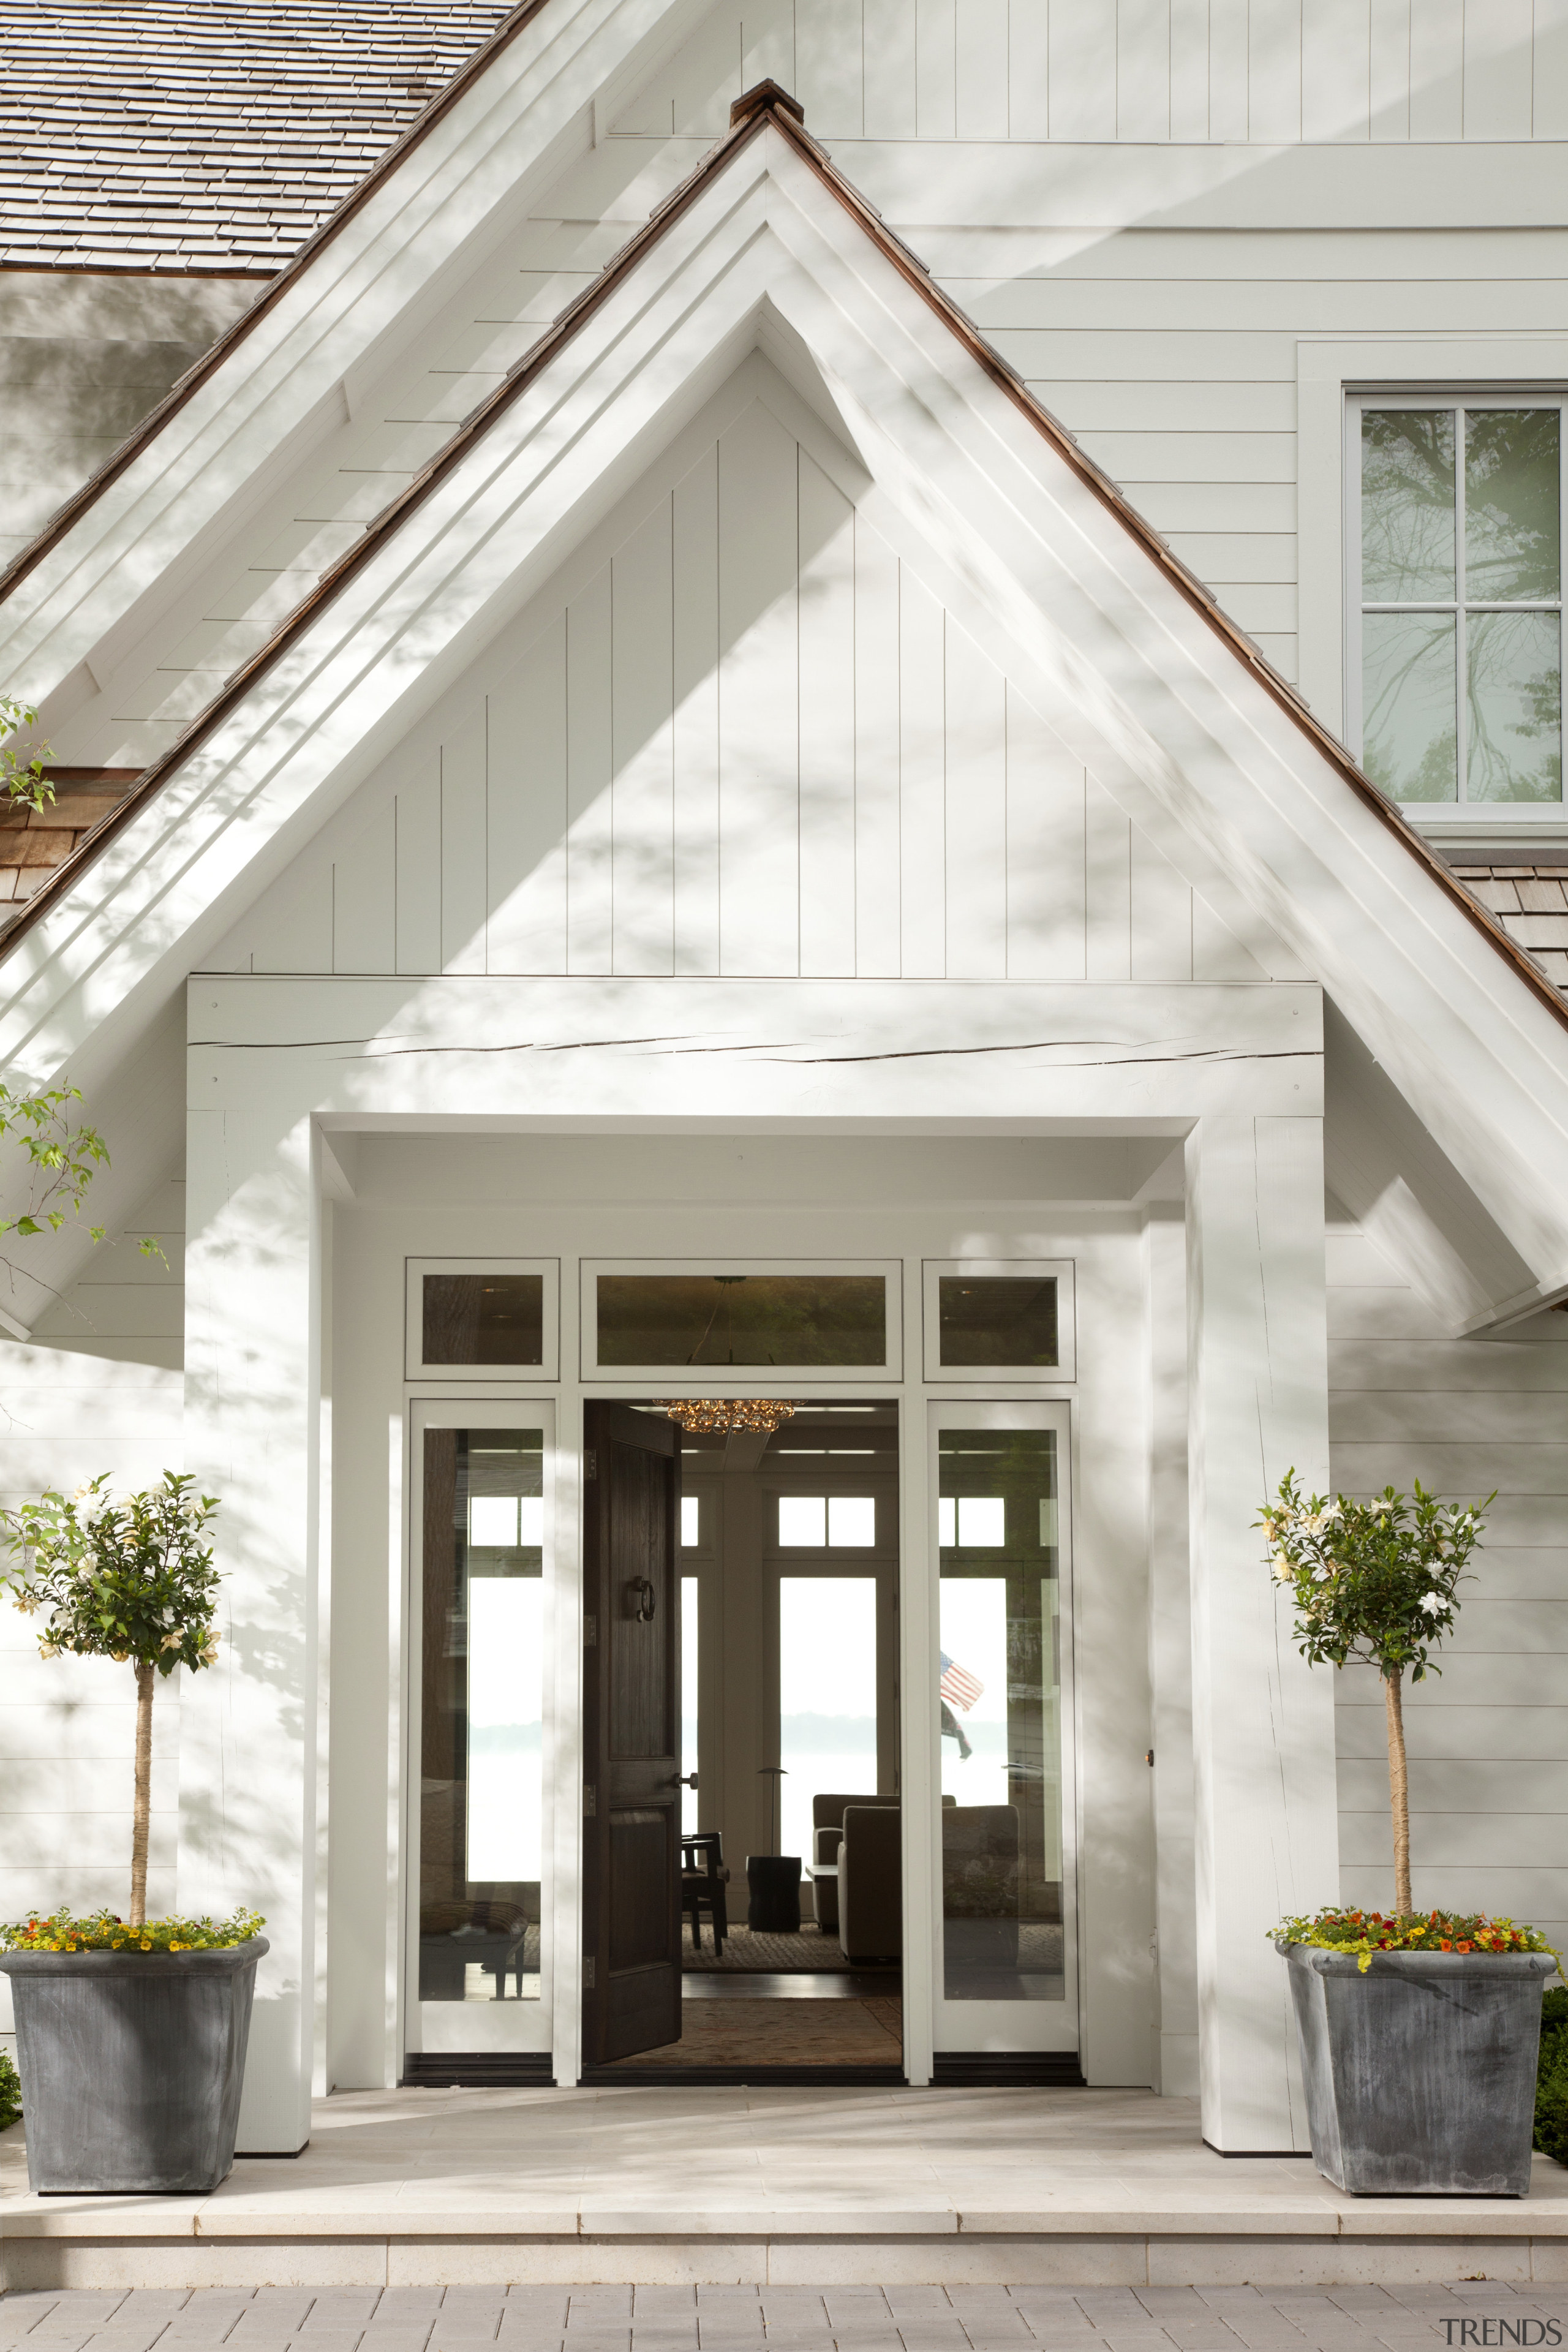 Weathered beams and columns impart a sense of door, facade, home, house, white